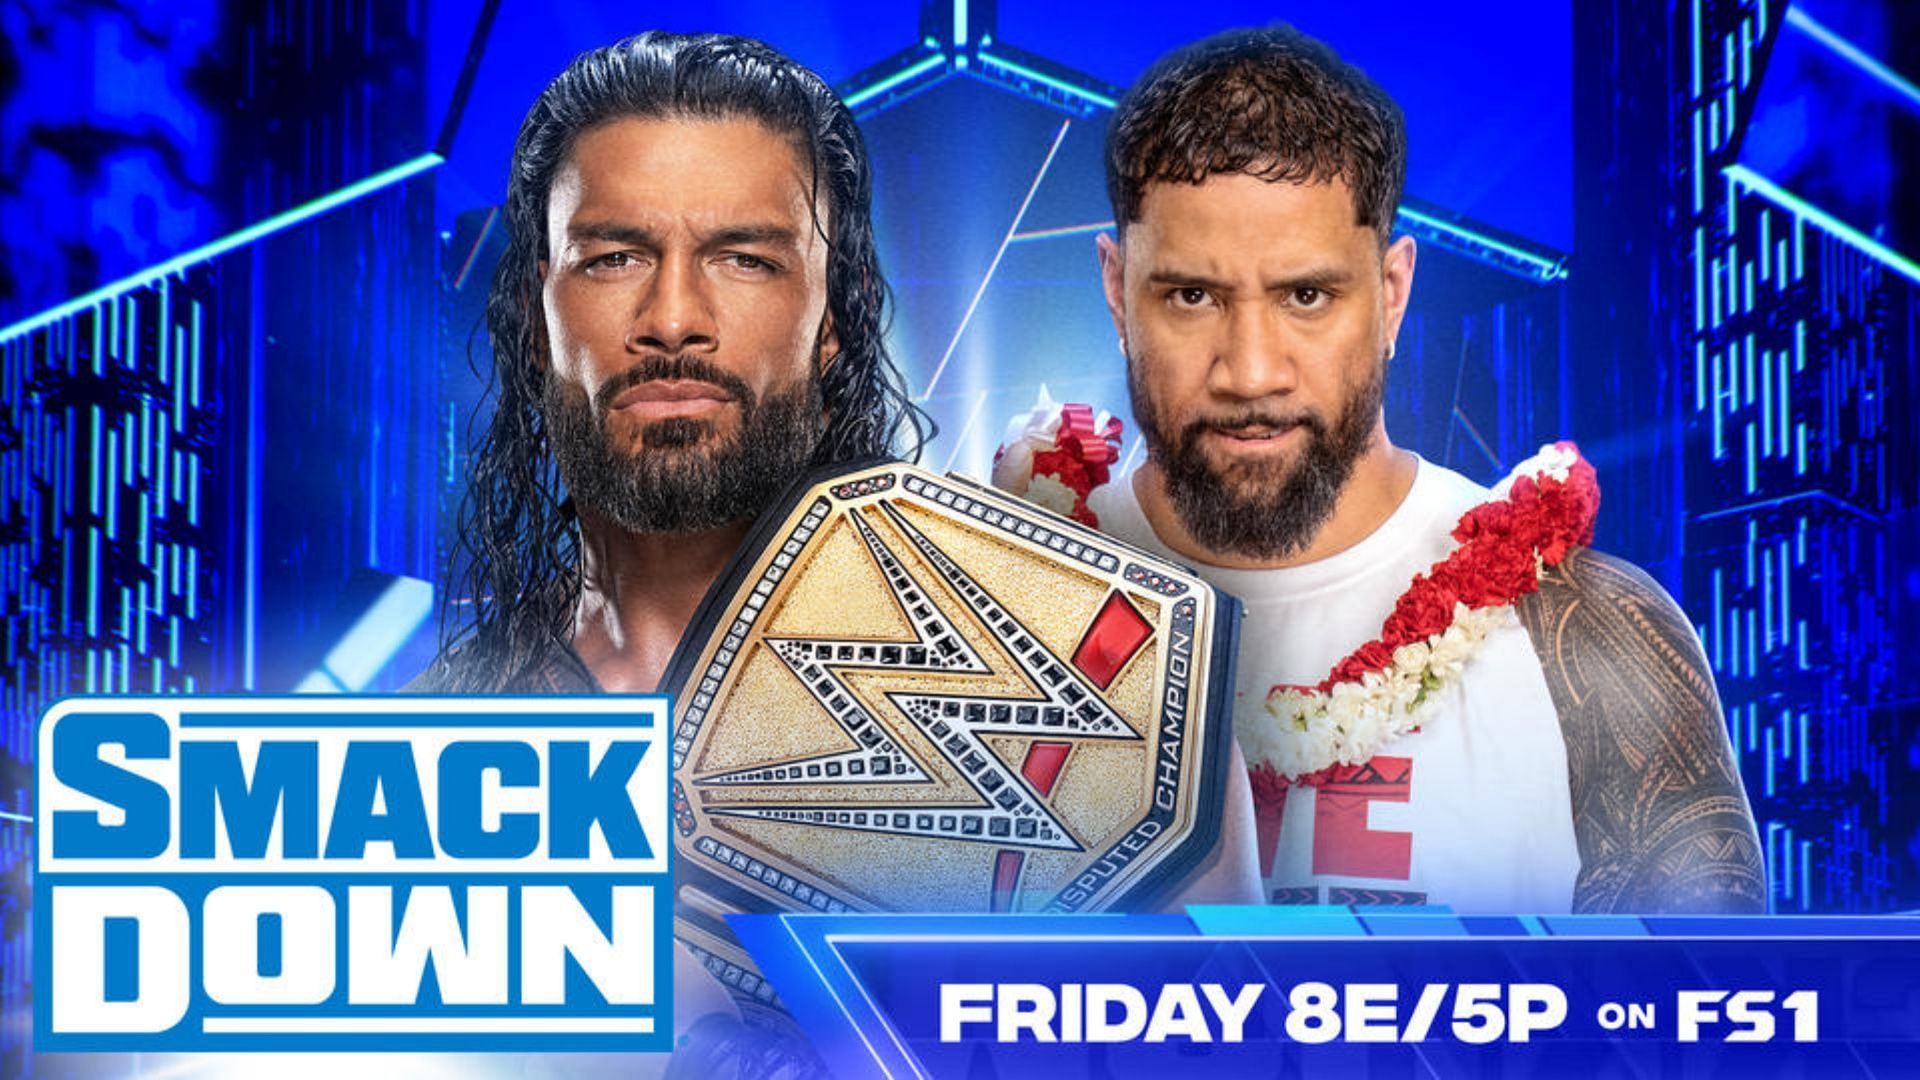 Roman Reigns and Jey Uso will set their Rules of Engagement on SmackDown this Friday.